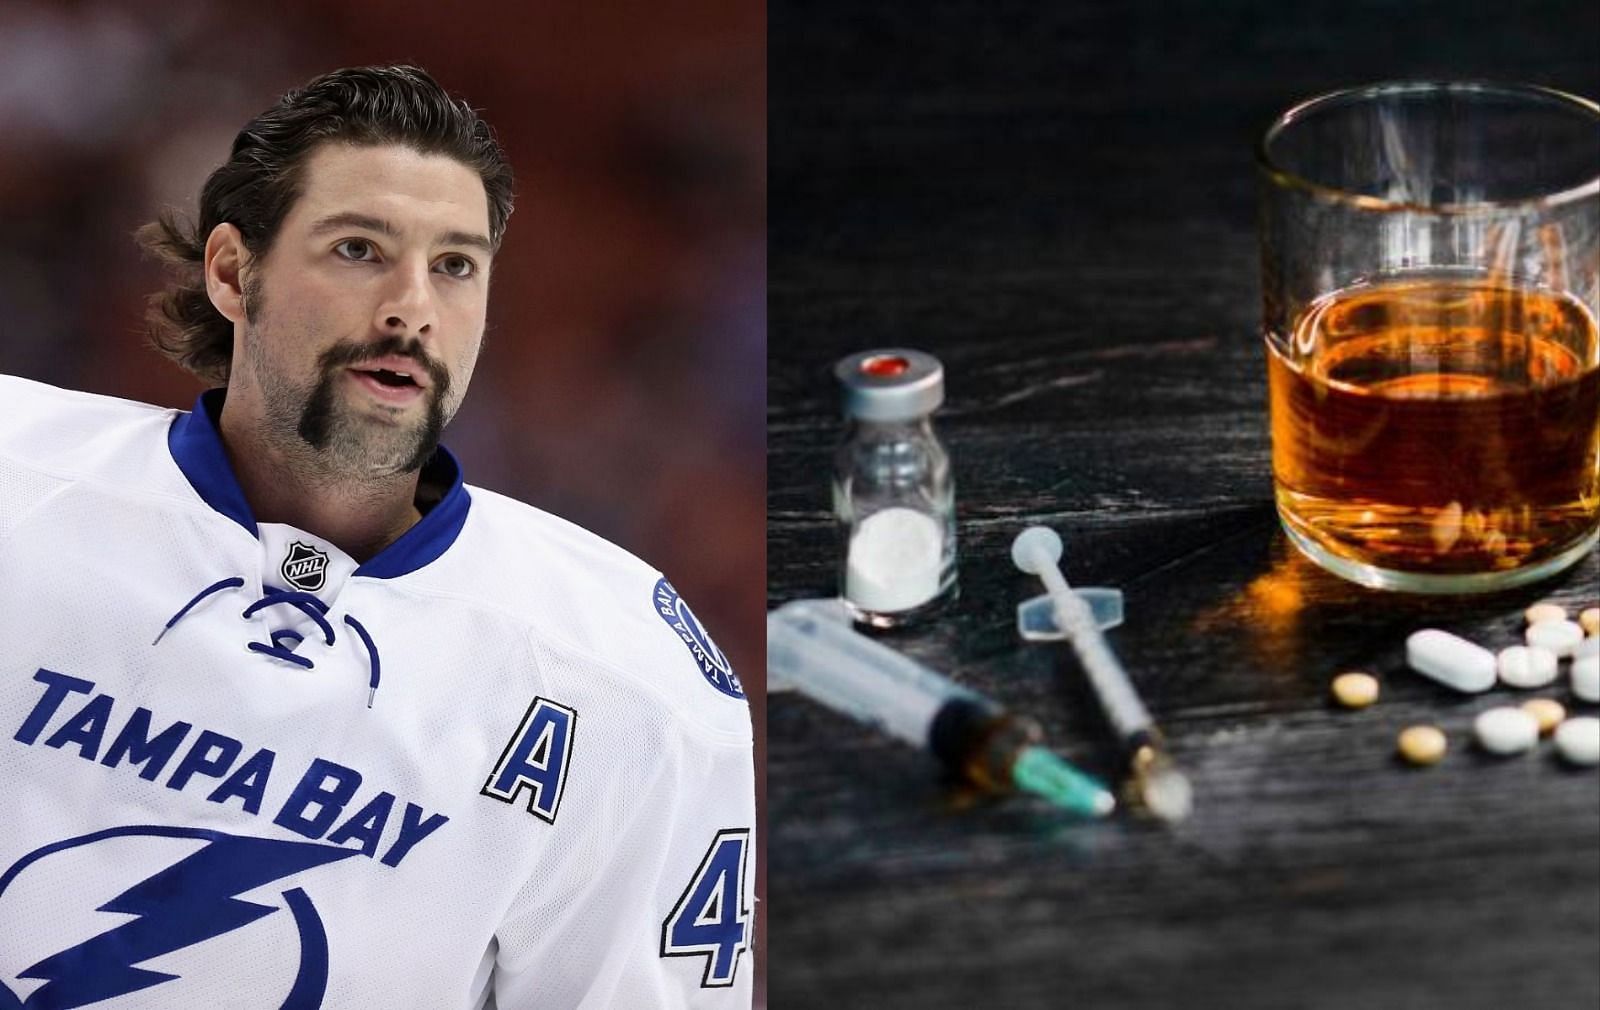 When Nate Thompson opened up about his crippling battle with drug and alcohol abuse